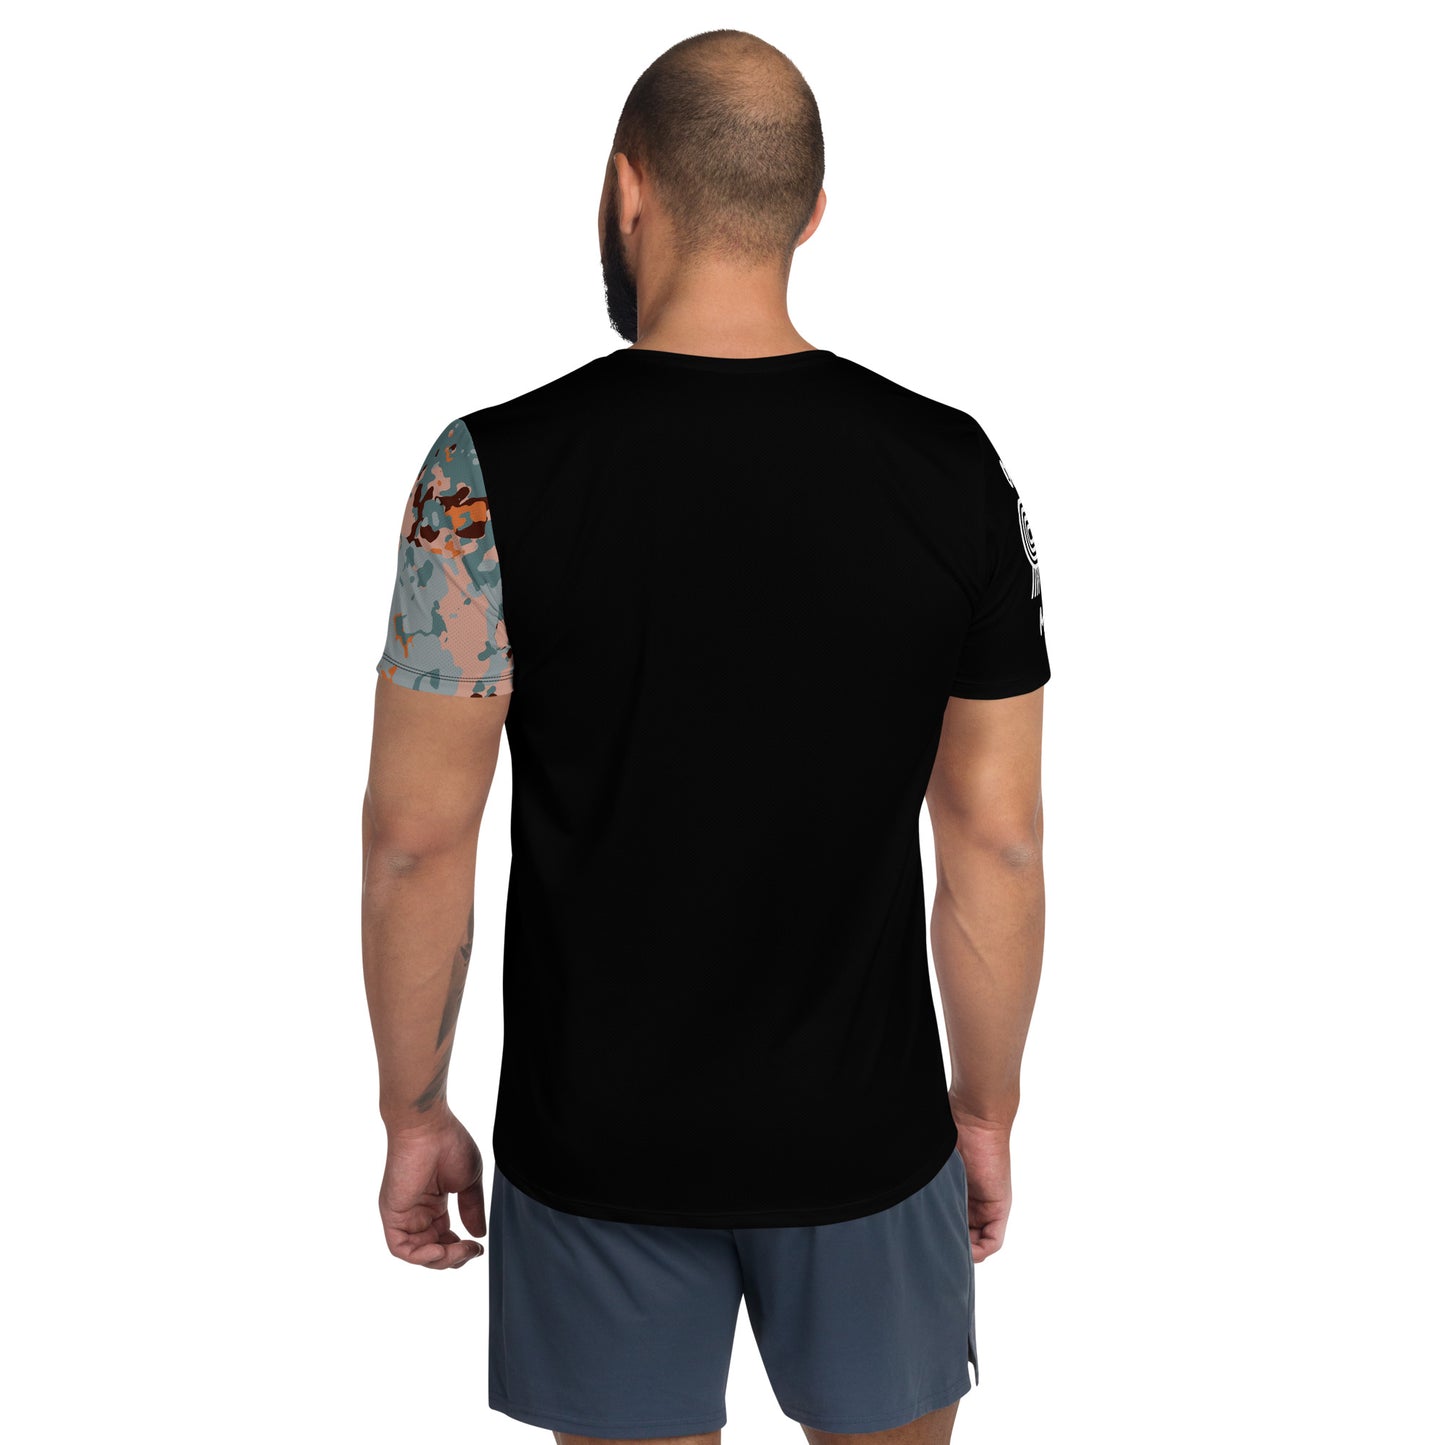 Official Members Cameo Compression Shirt